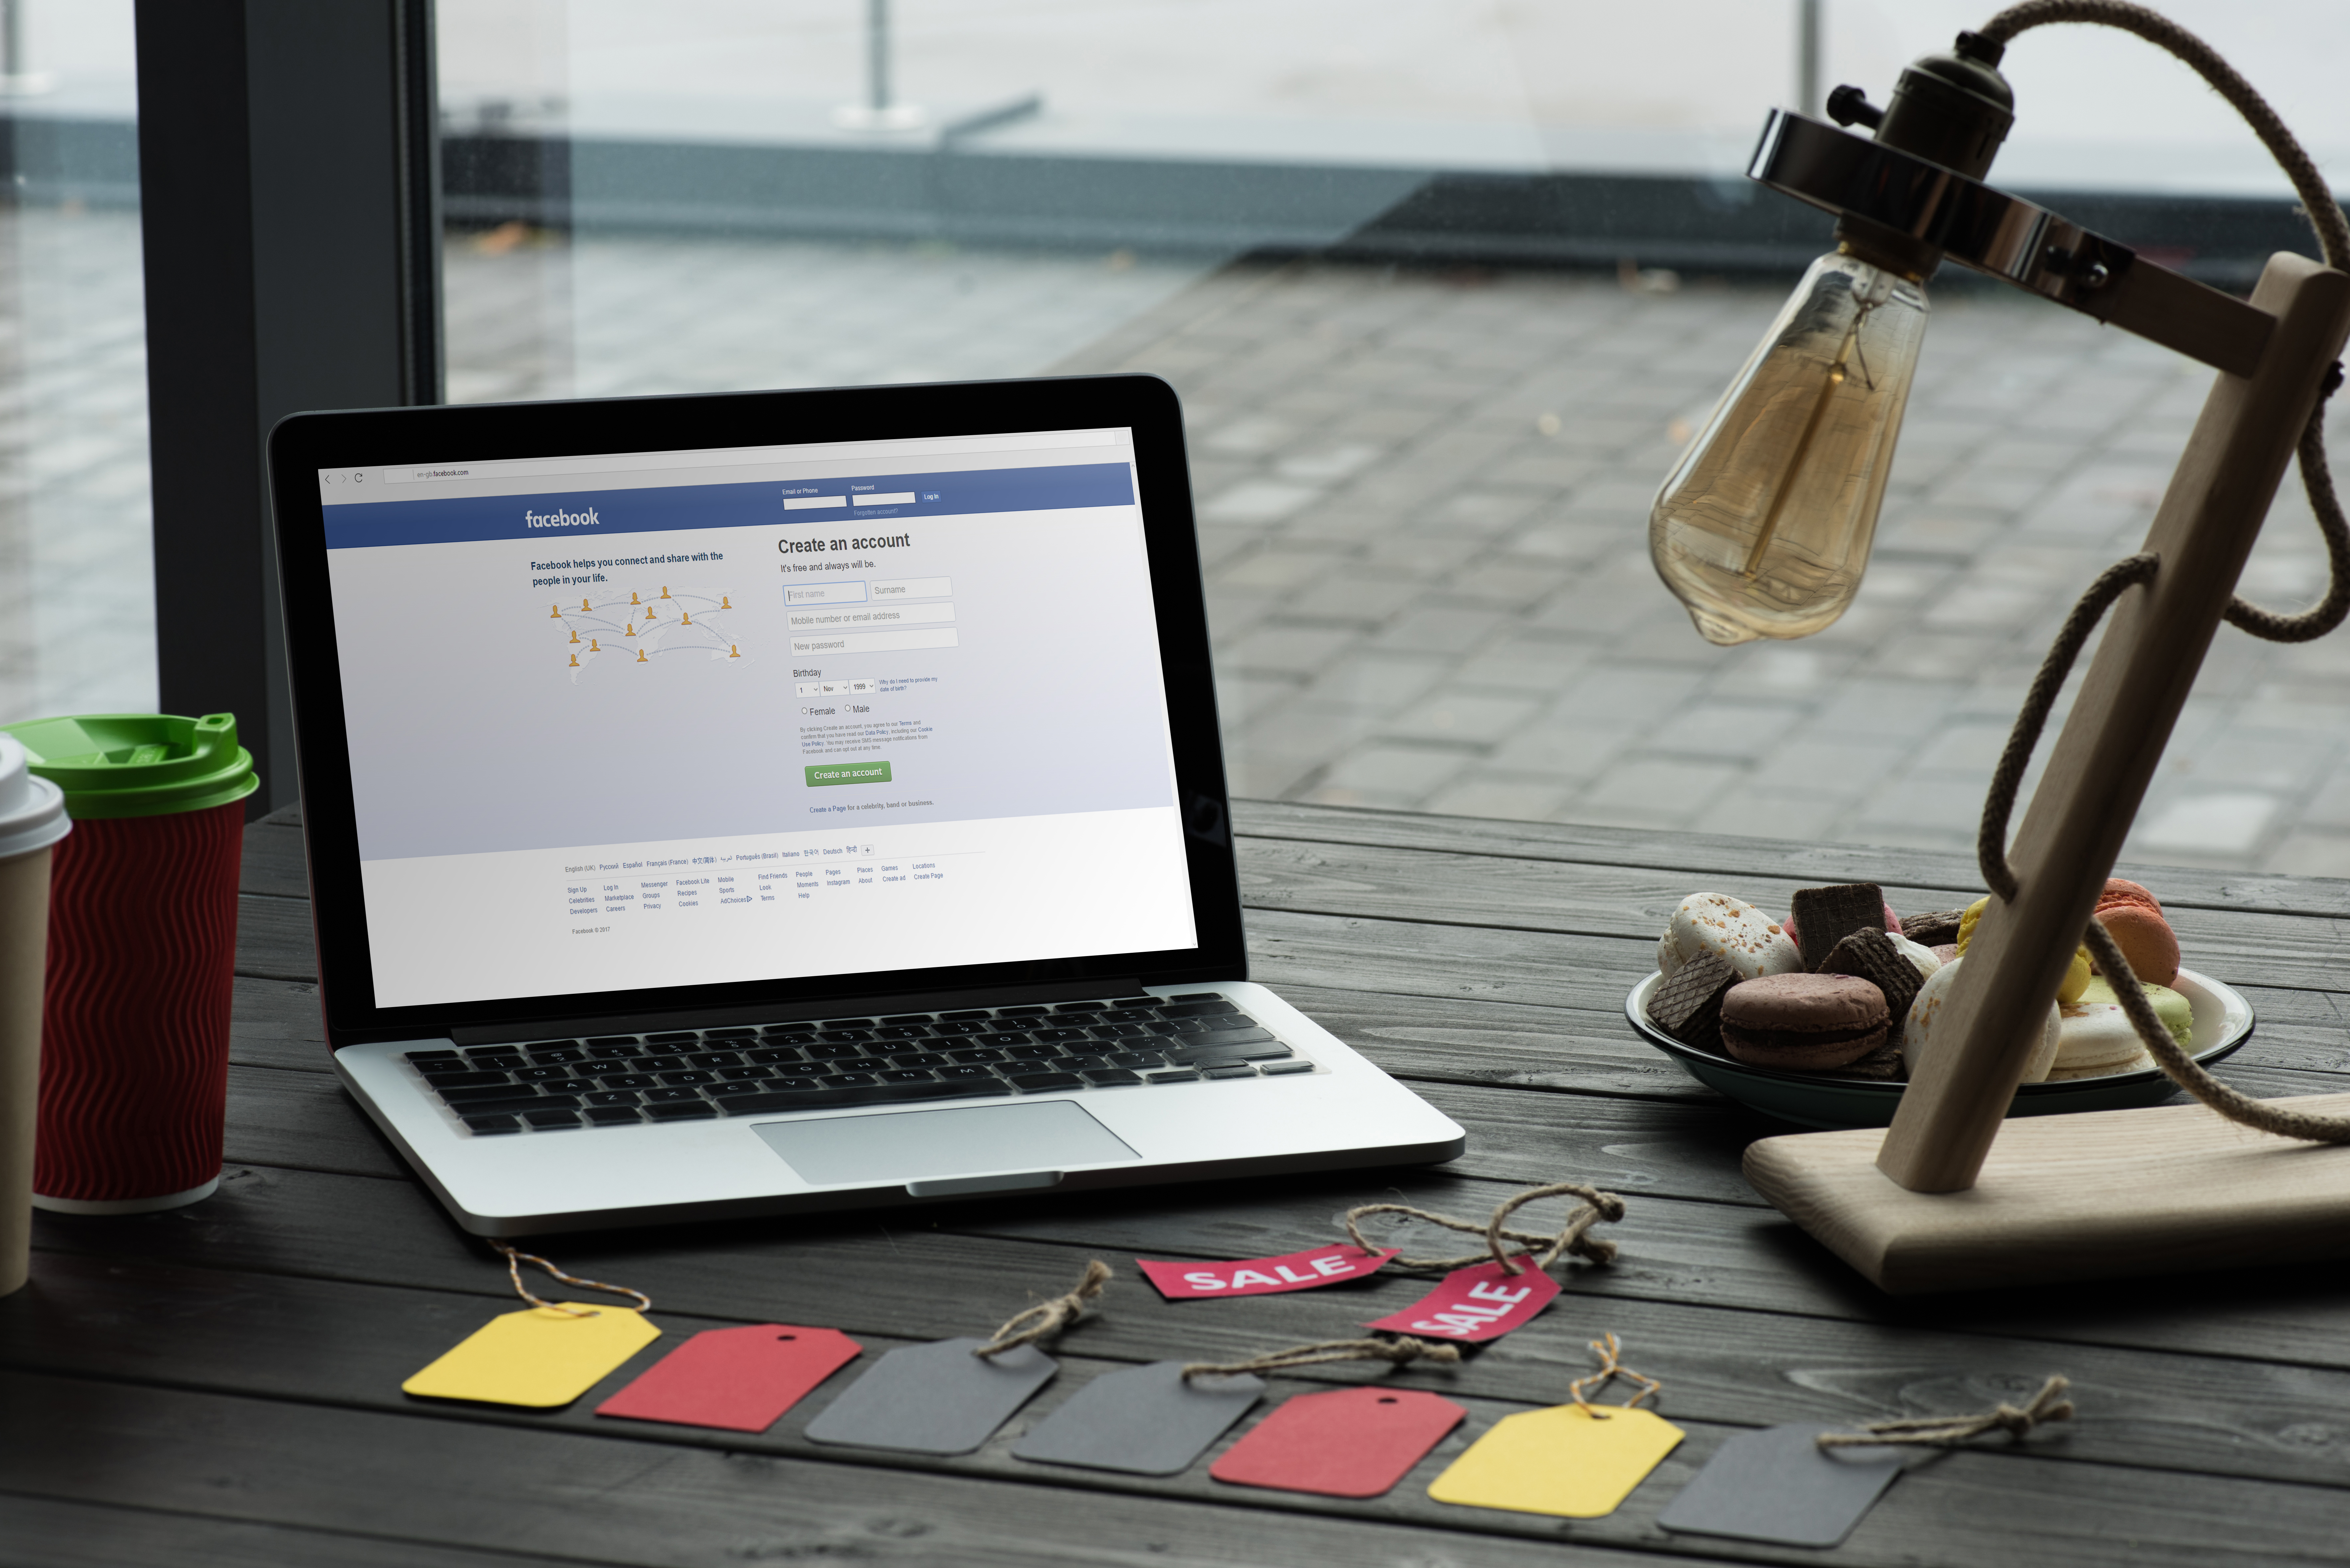 How to Optimize Your Facebook Profile for Your Business